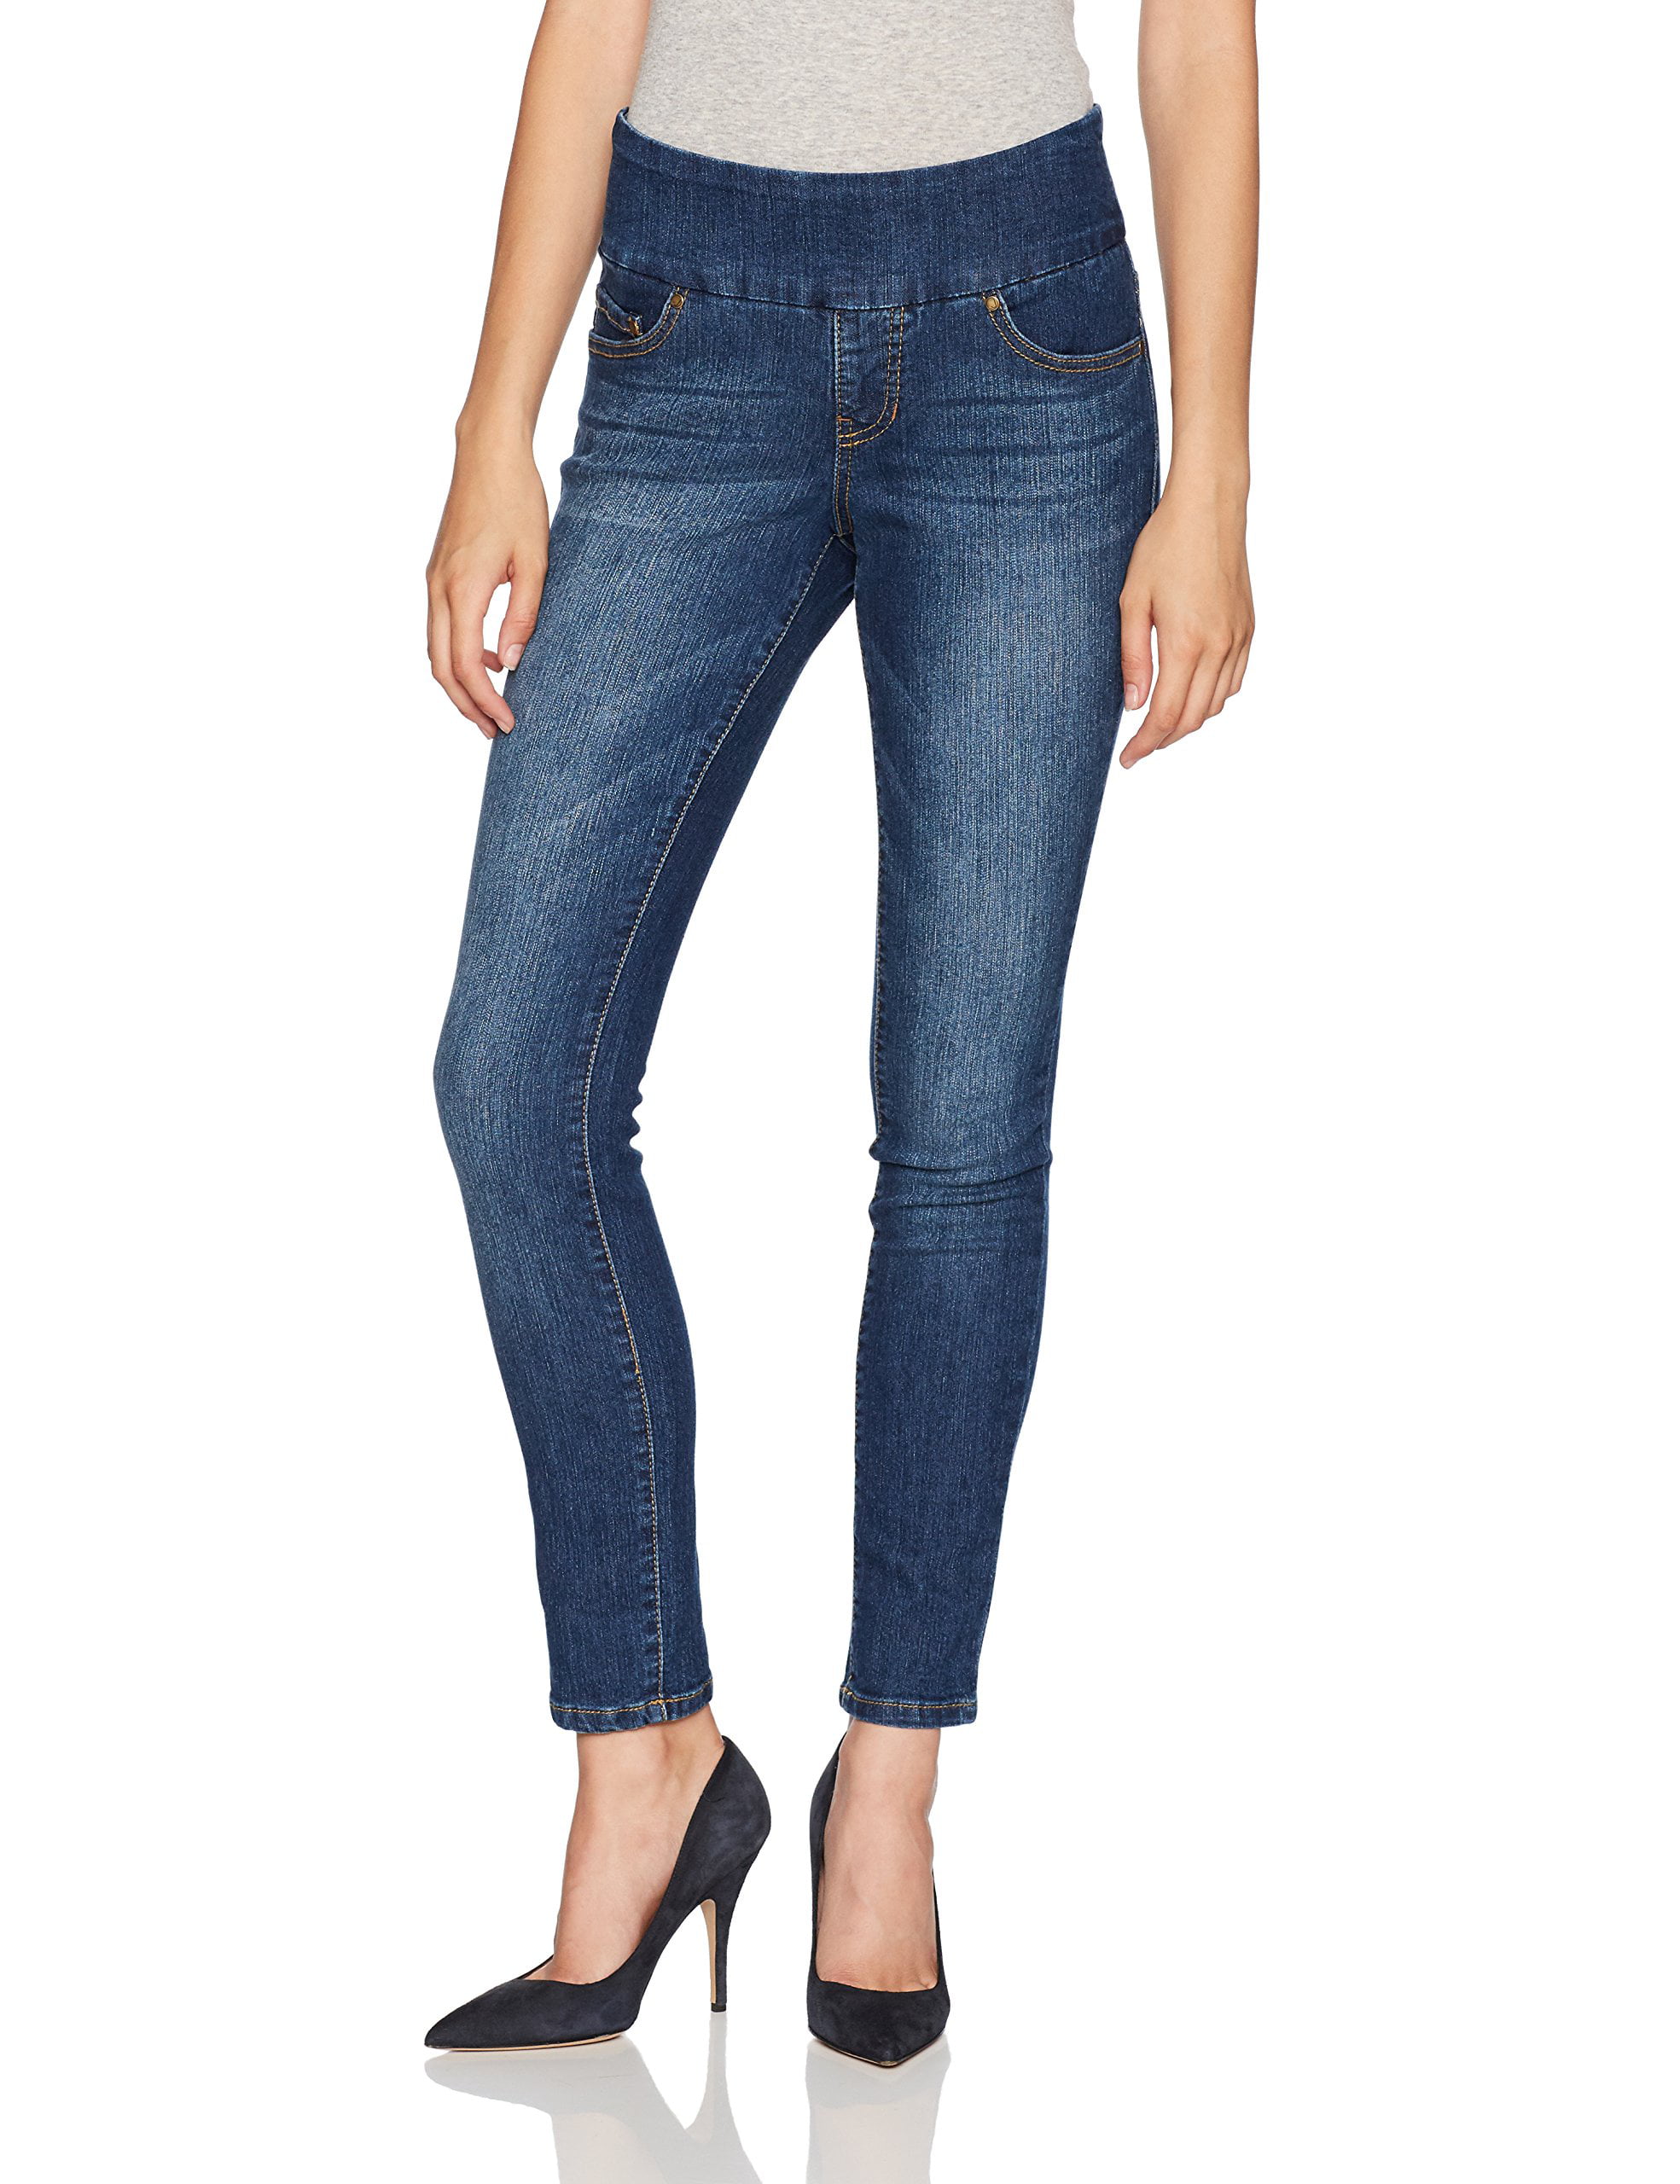 JAG Jeans - Womens Jeans Petite Skinny High-Rise Stretch 10P - Walmart ...